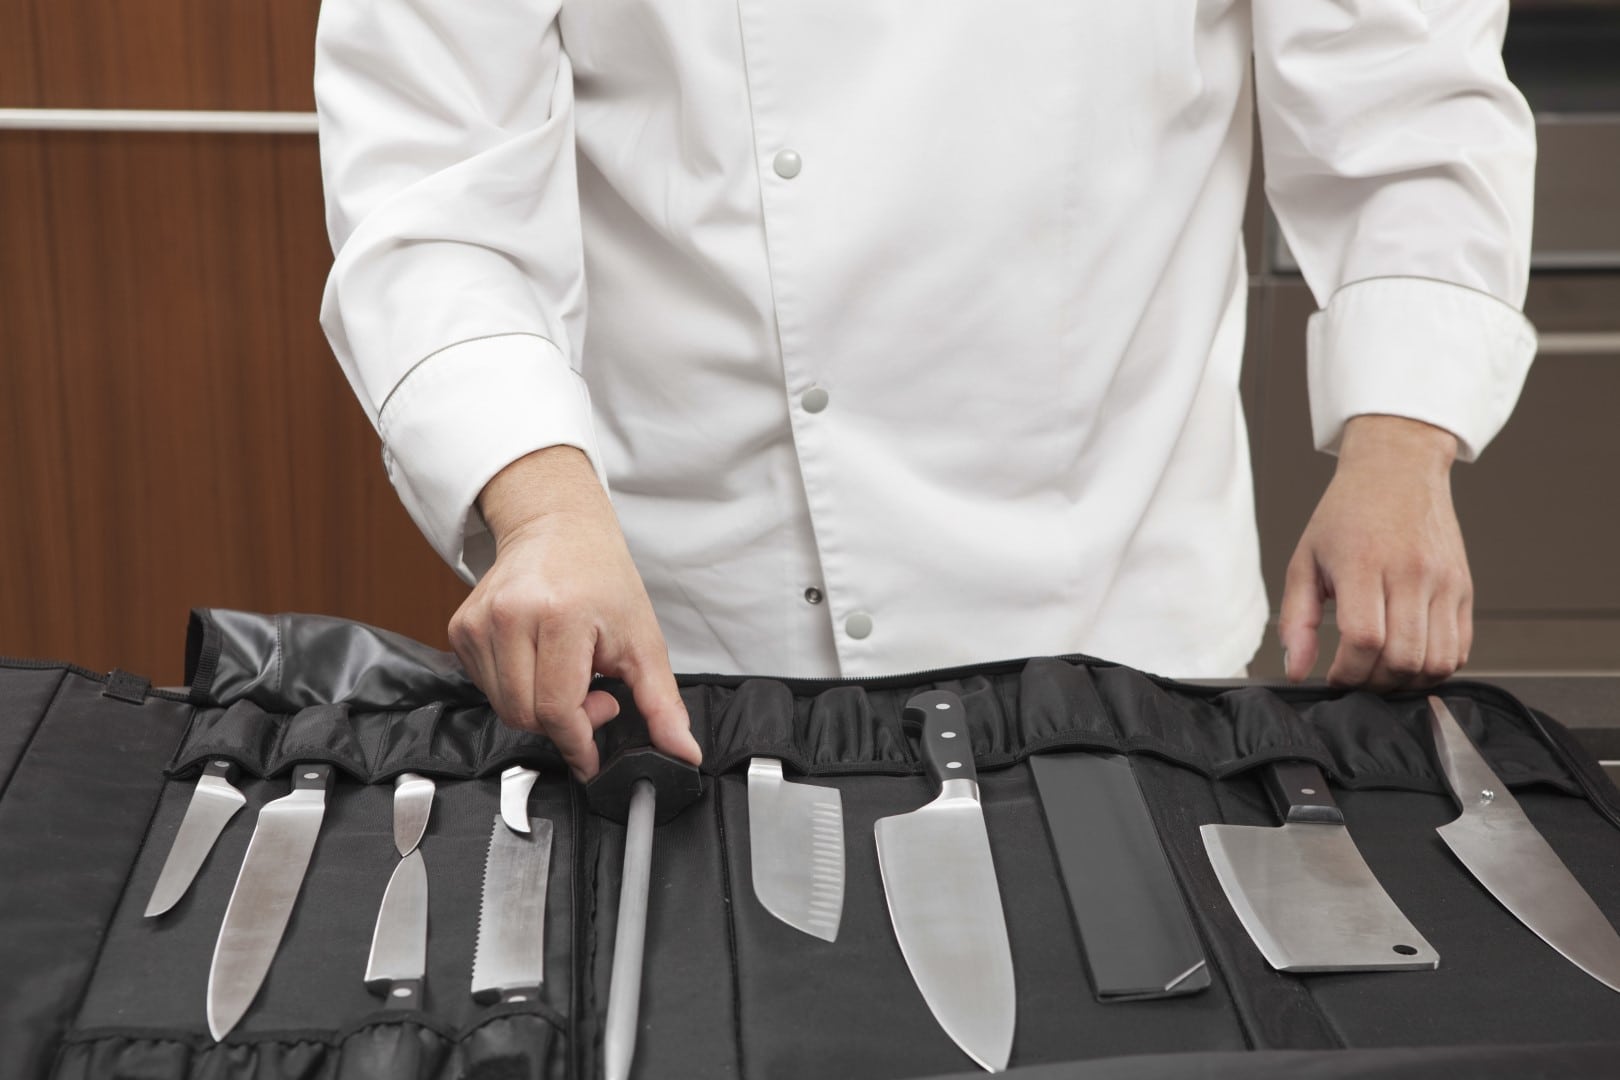 Midsection of male chef selecting knife sharpener out of full set in commercial kitchen